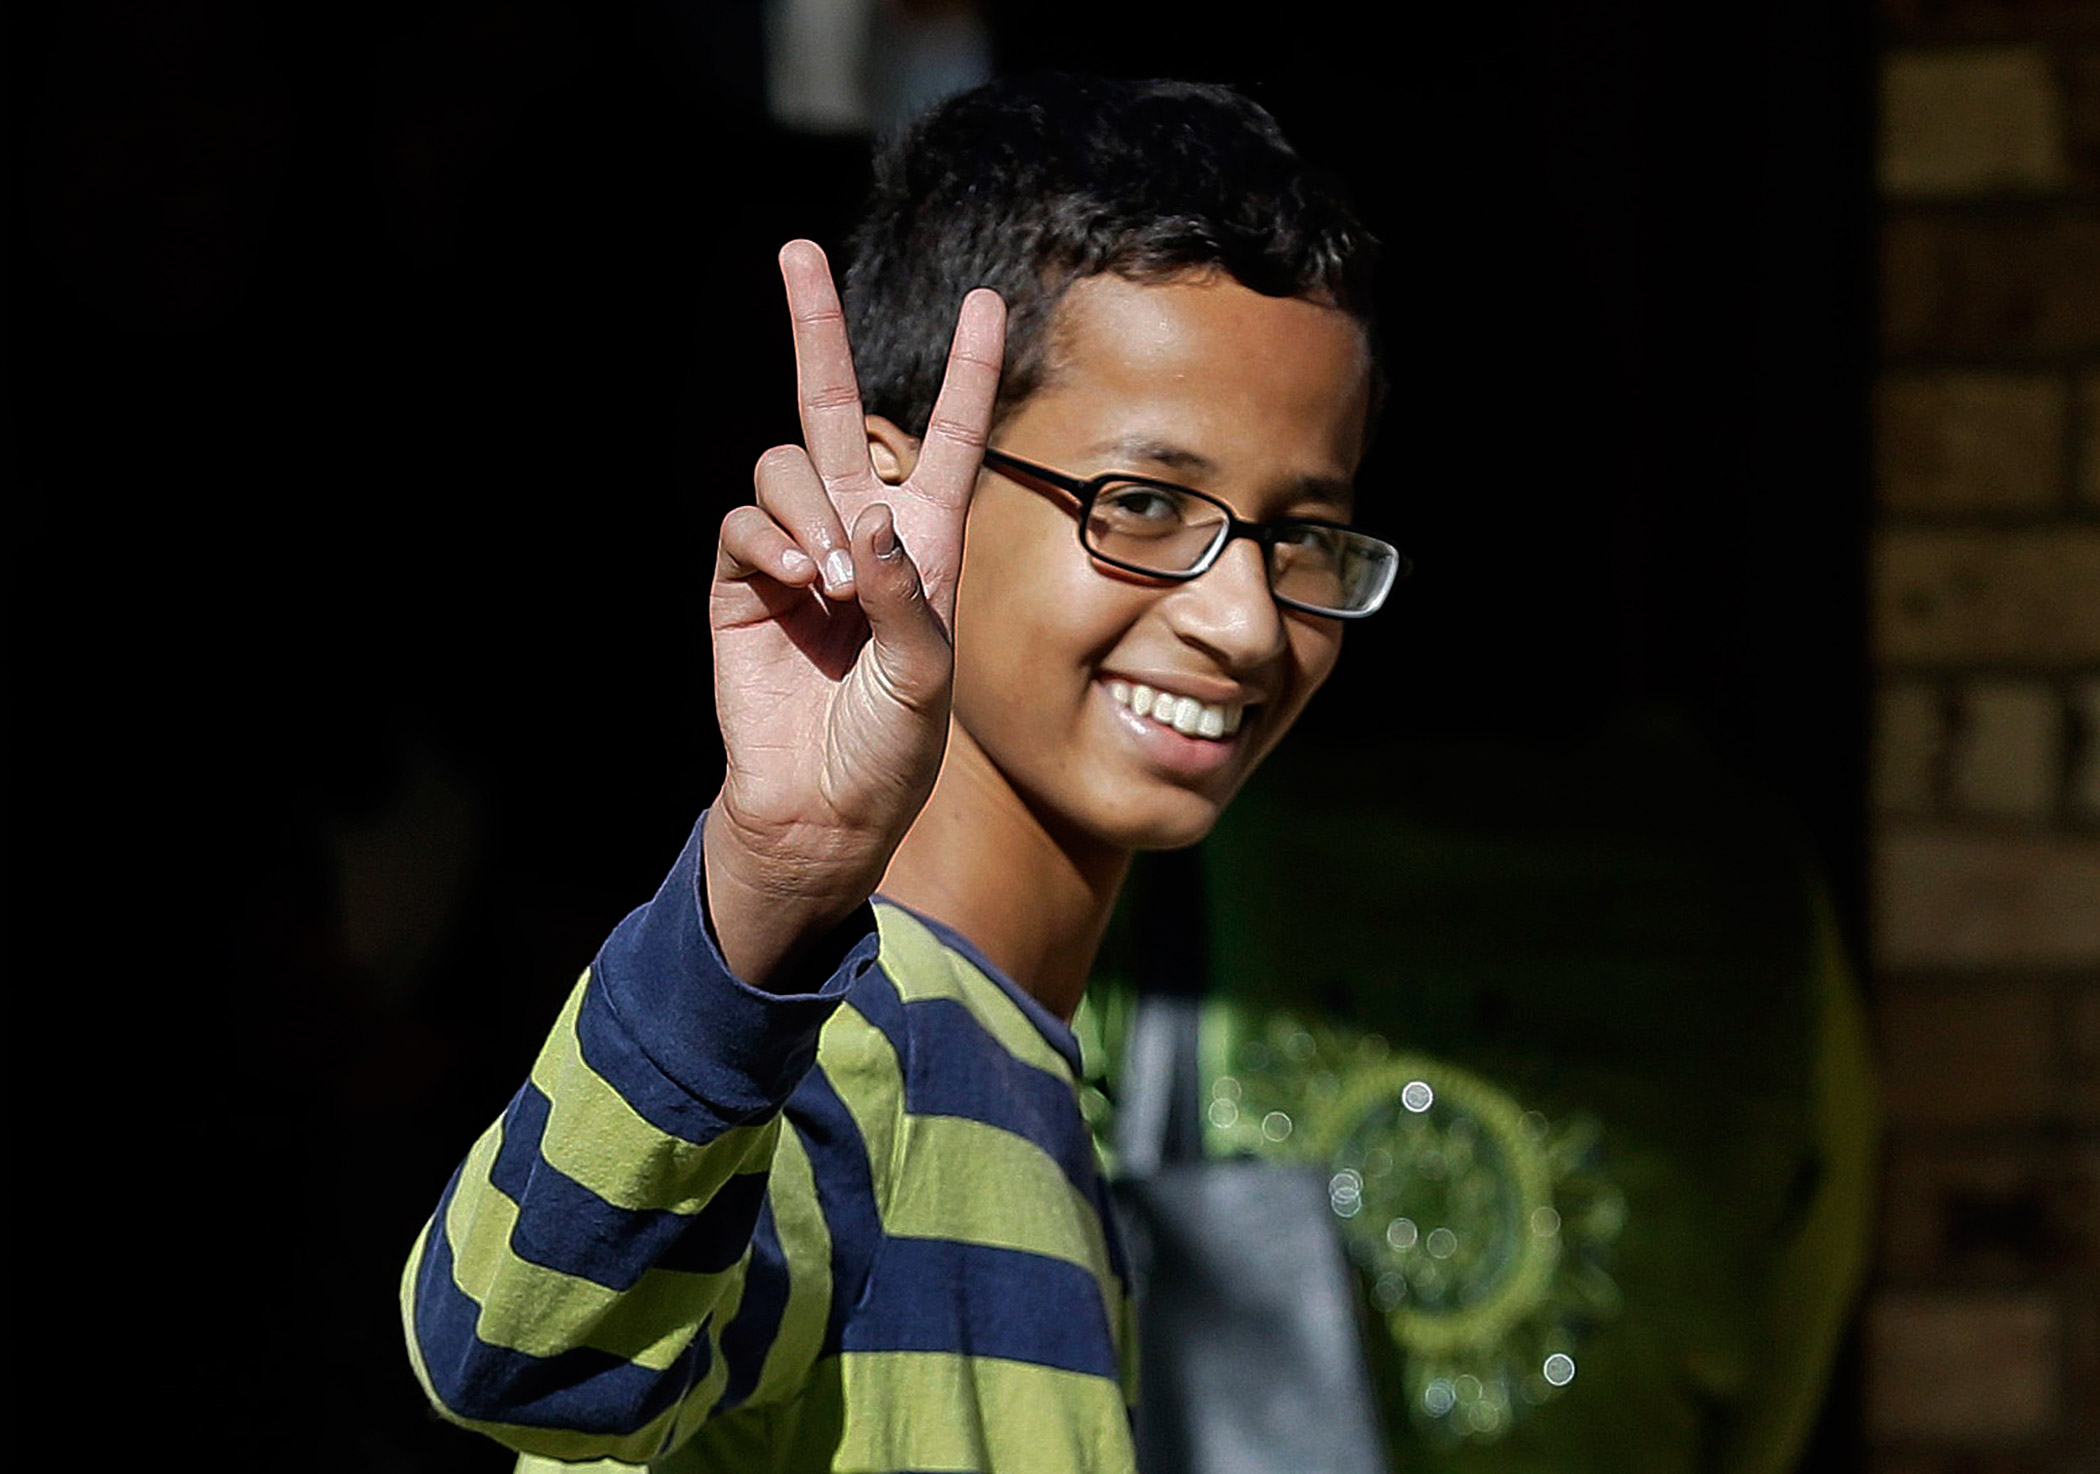 Ahmed Mohamed, 14, gestures as he arrives to his family's home on Sept. 17, 2015 in Irving, Texas. (LM Otero—AP)